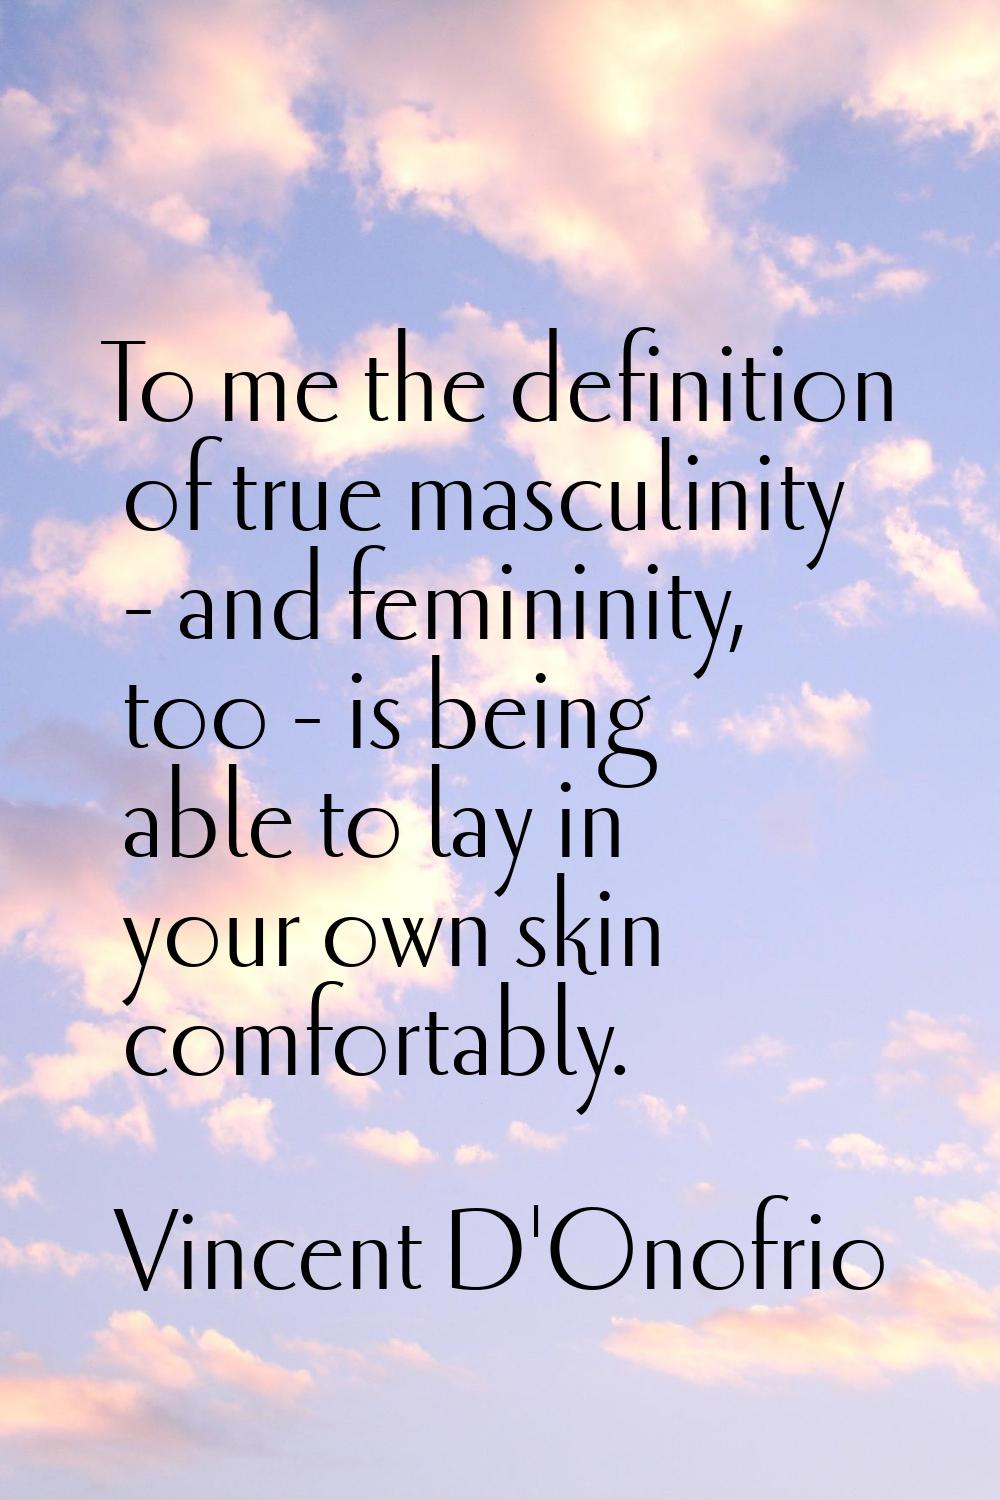 To me the definition of true masculinity - and femininity, too - is being able to lay in your own s